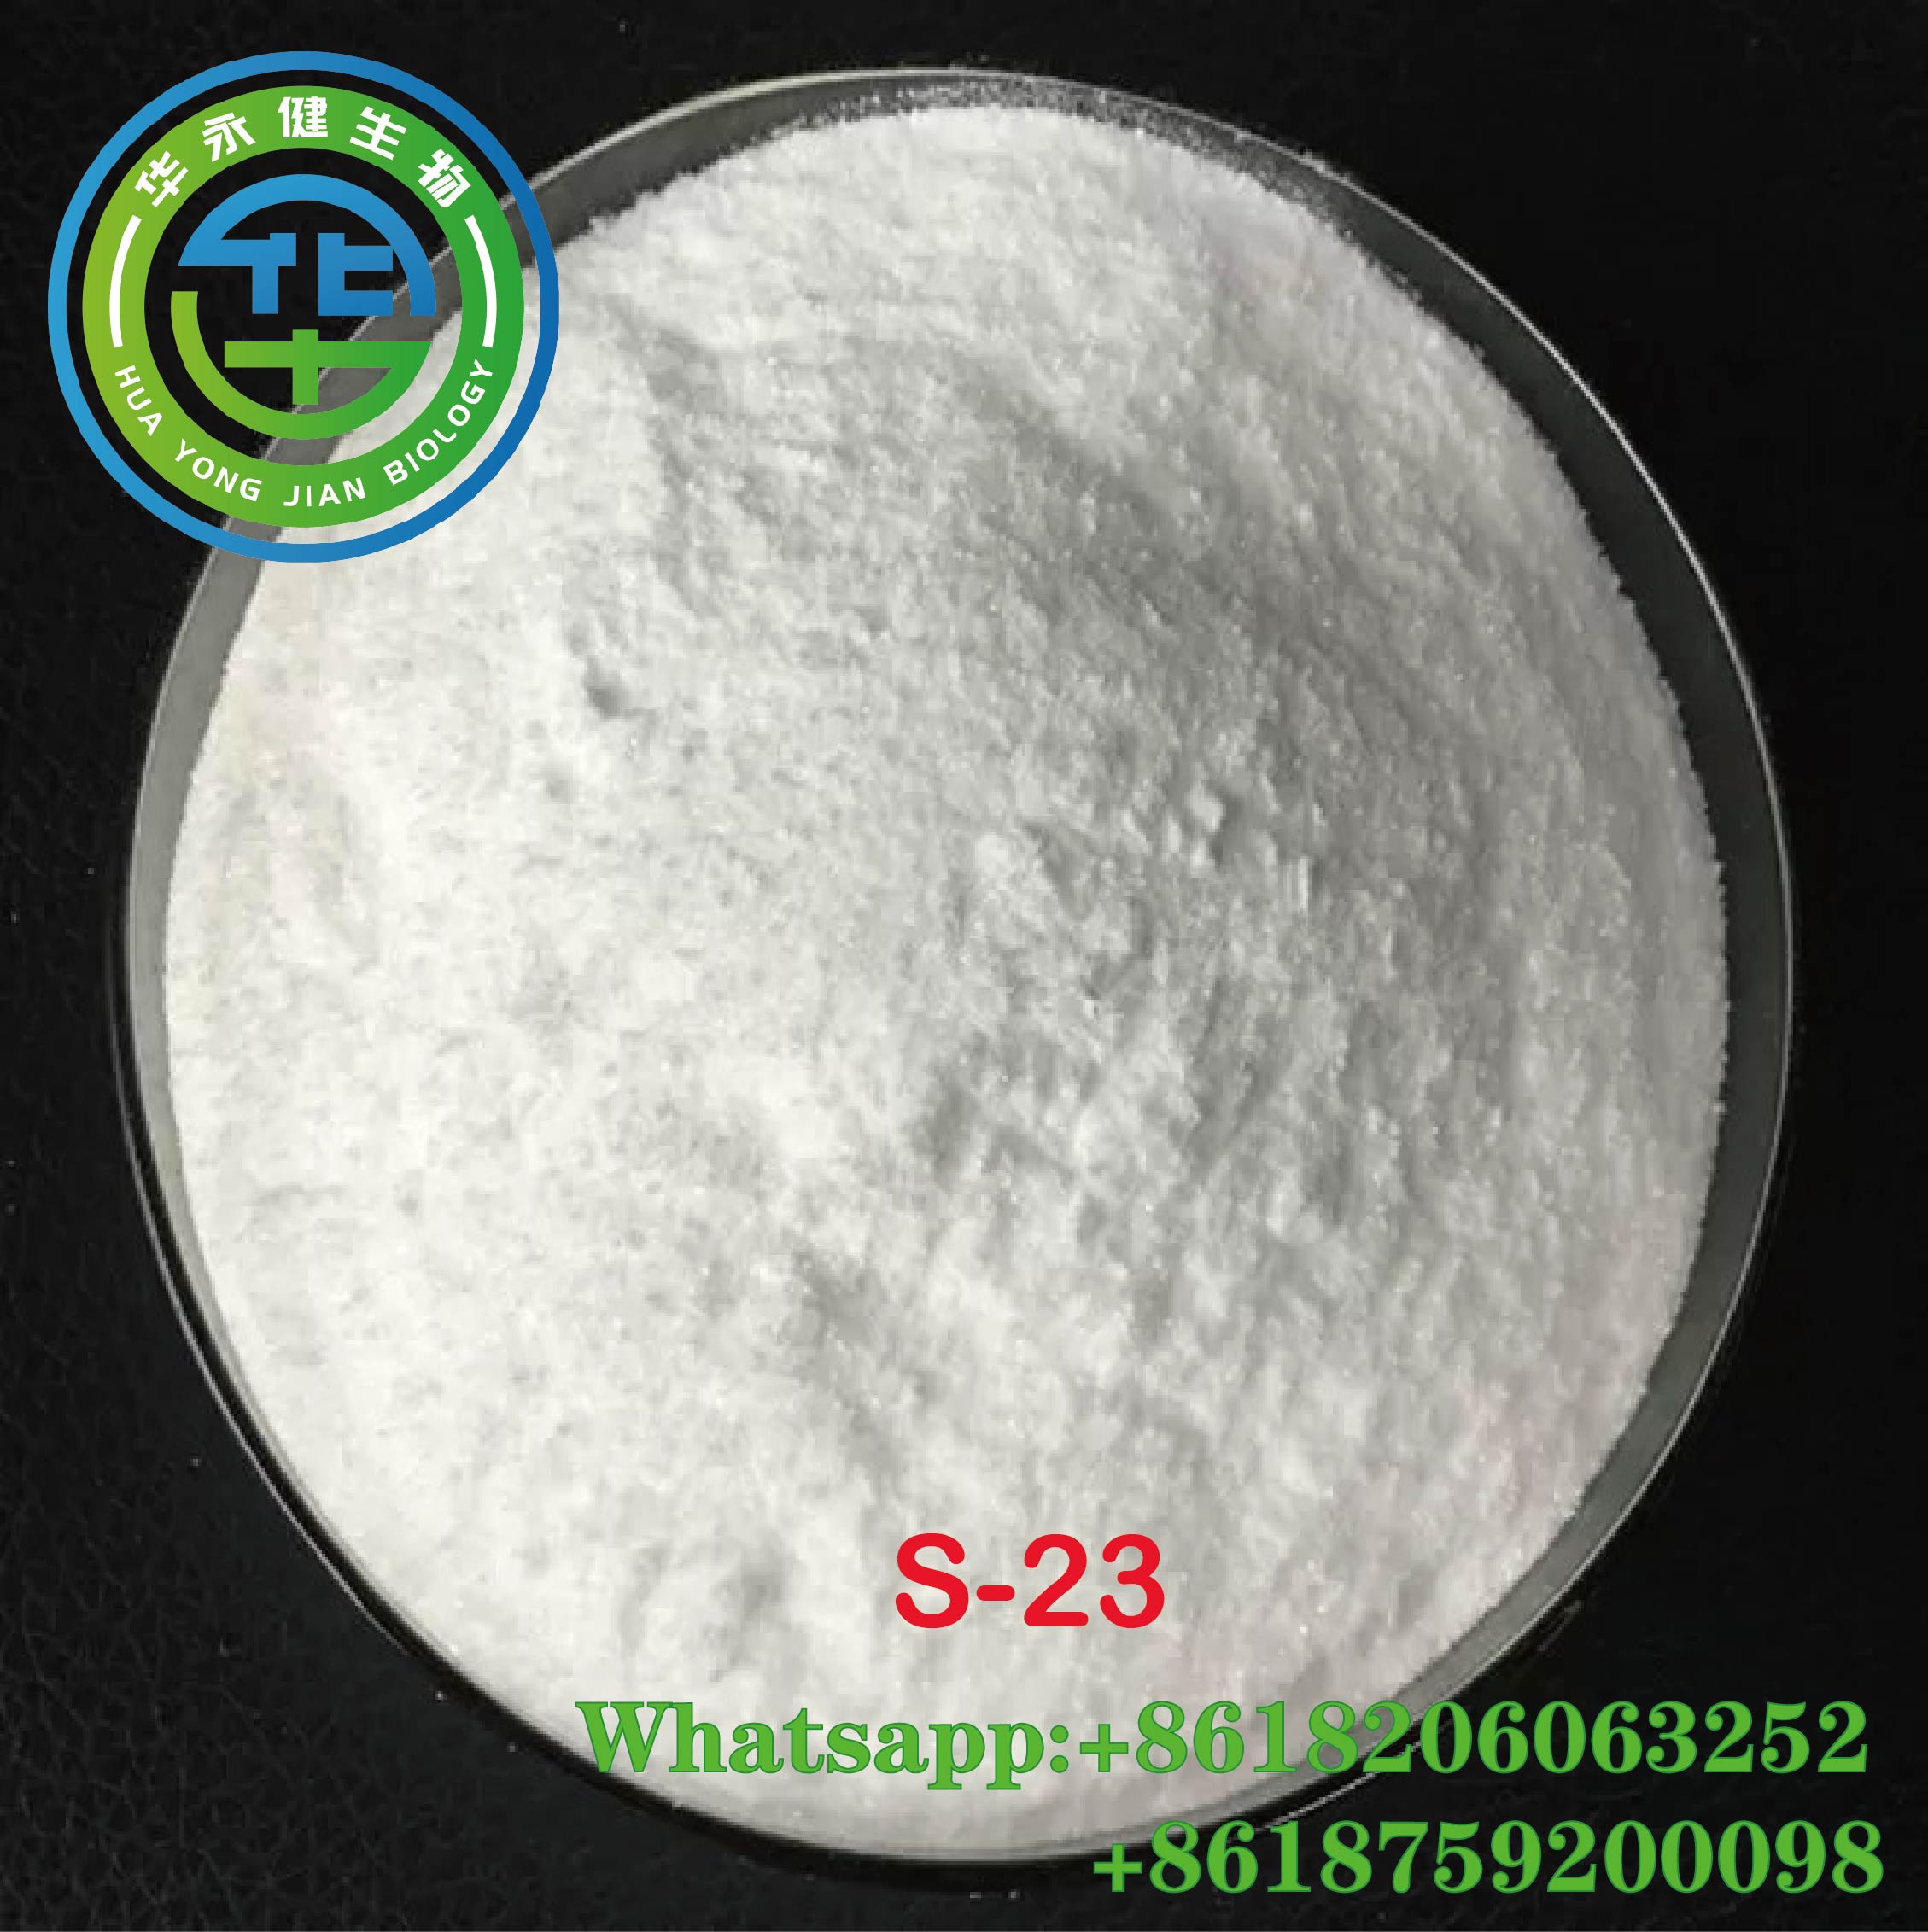 High Purity S-23 Sarms Steroids Powder for Fat Burning Cutting Cycle Weight Loss 